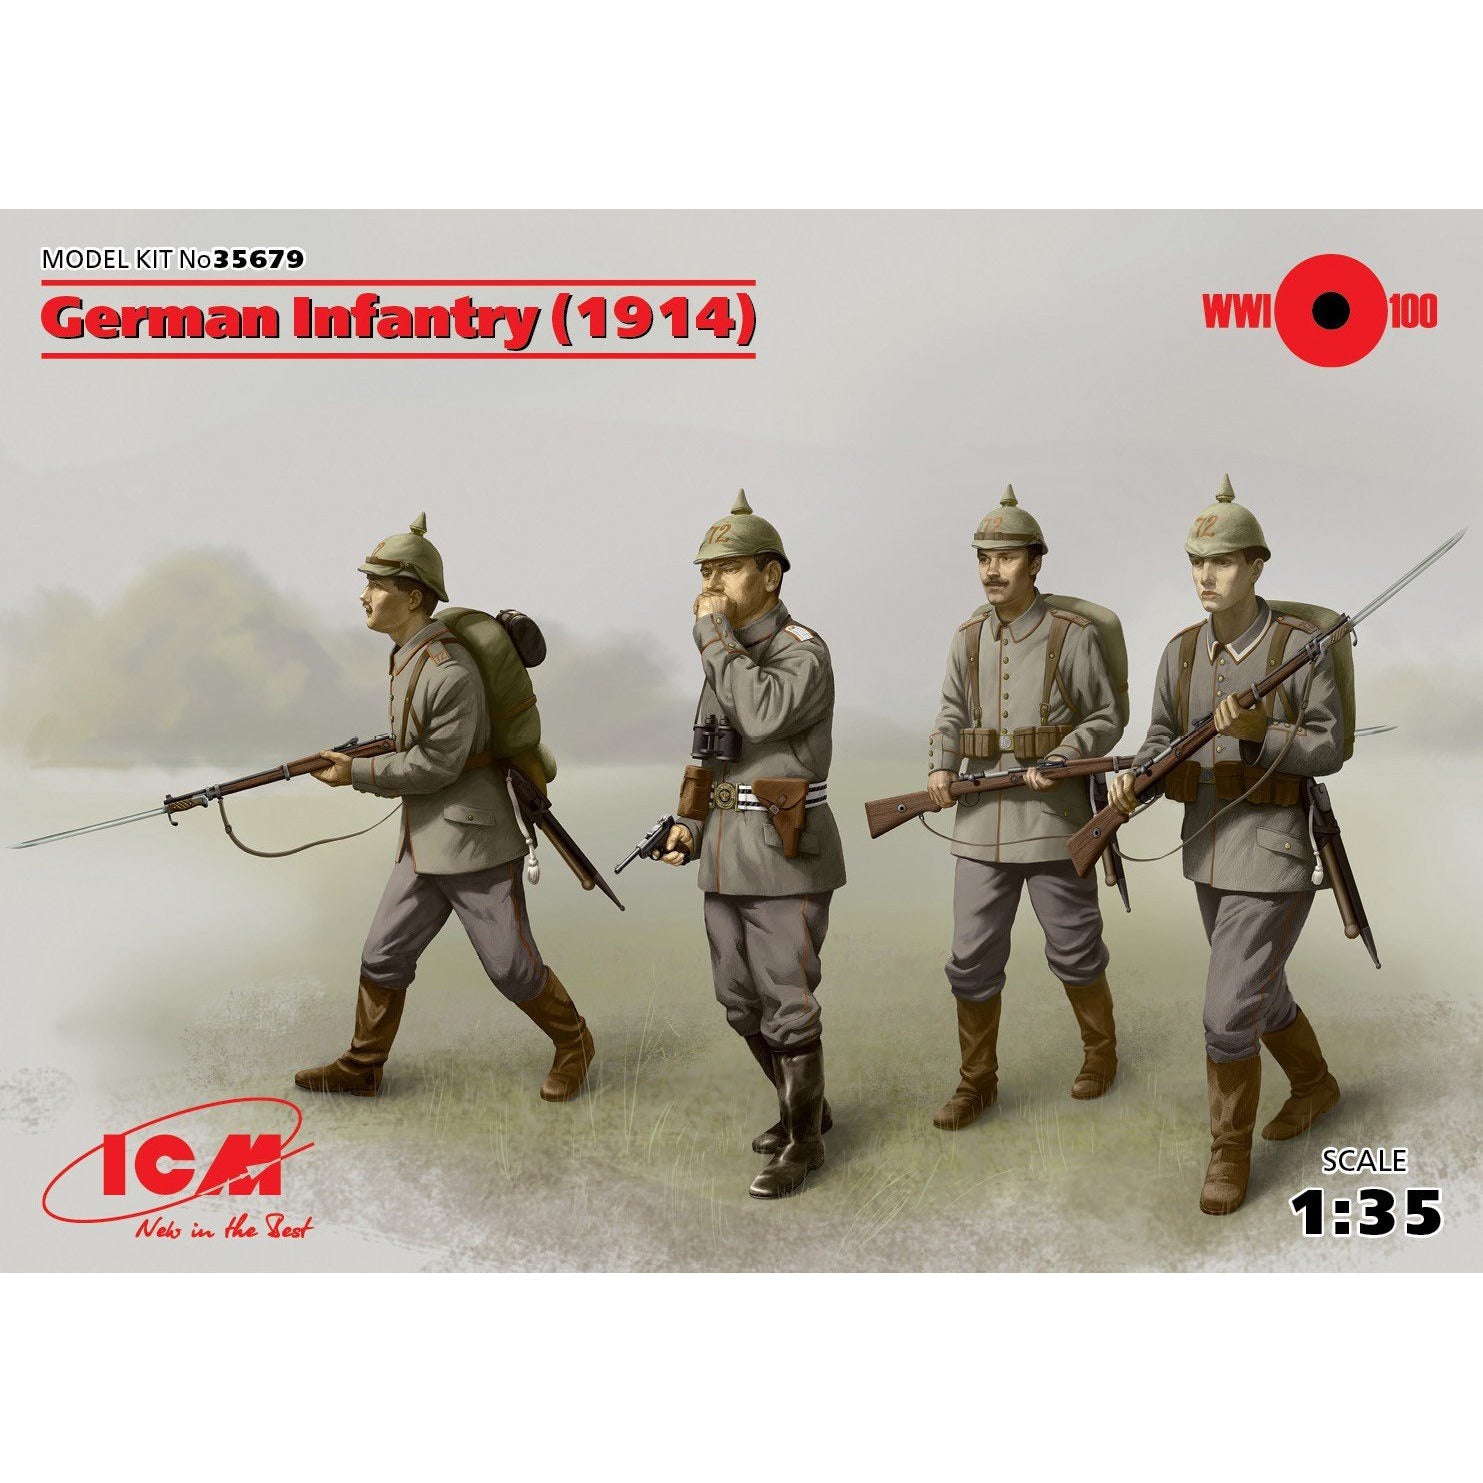 German Infantry 1914 1/35 by ICM